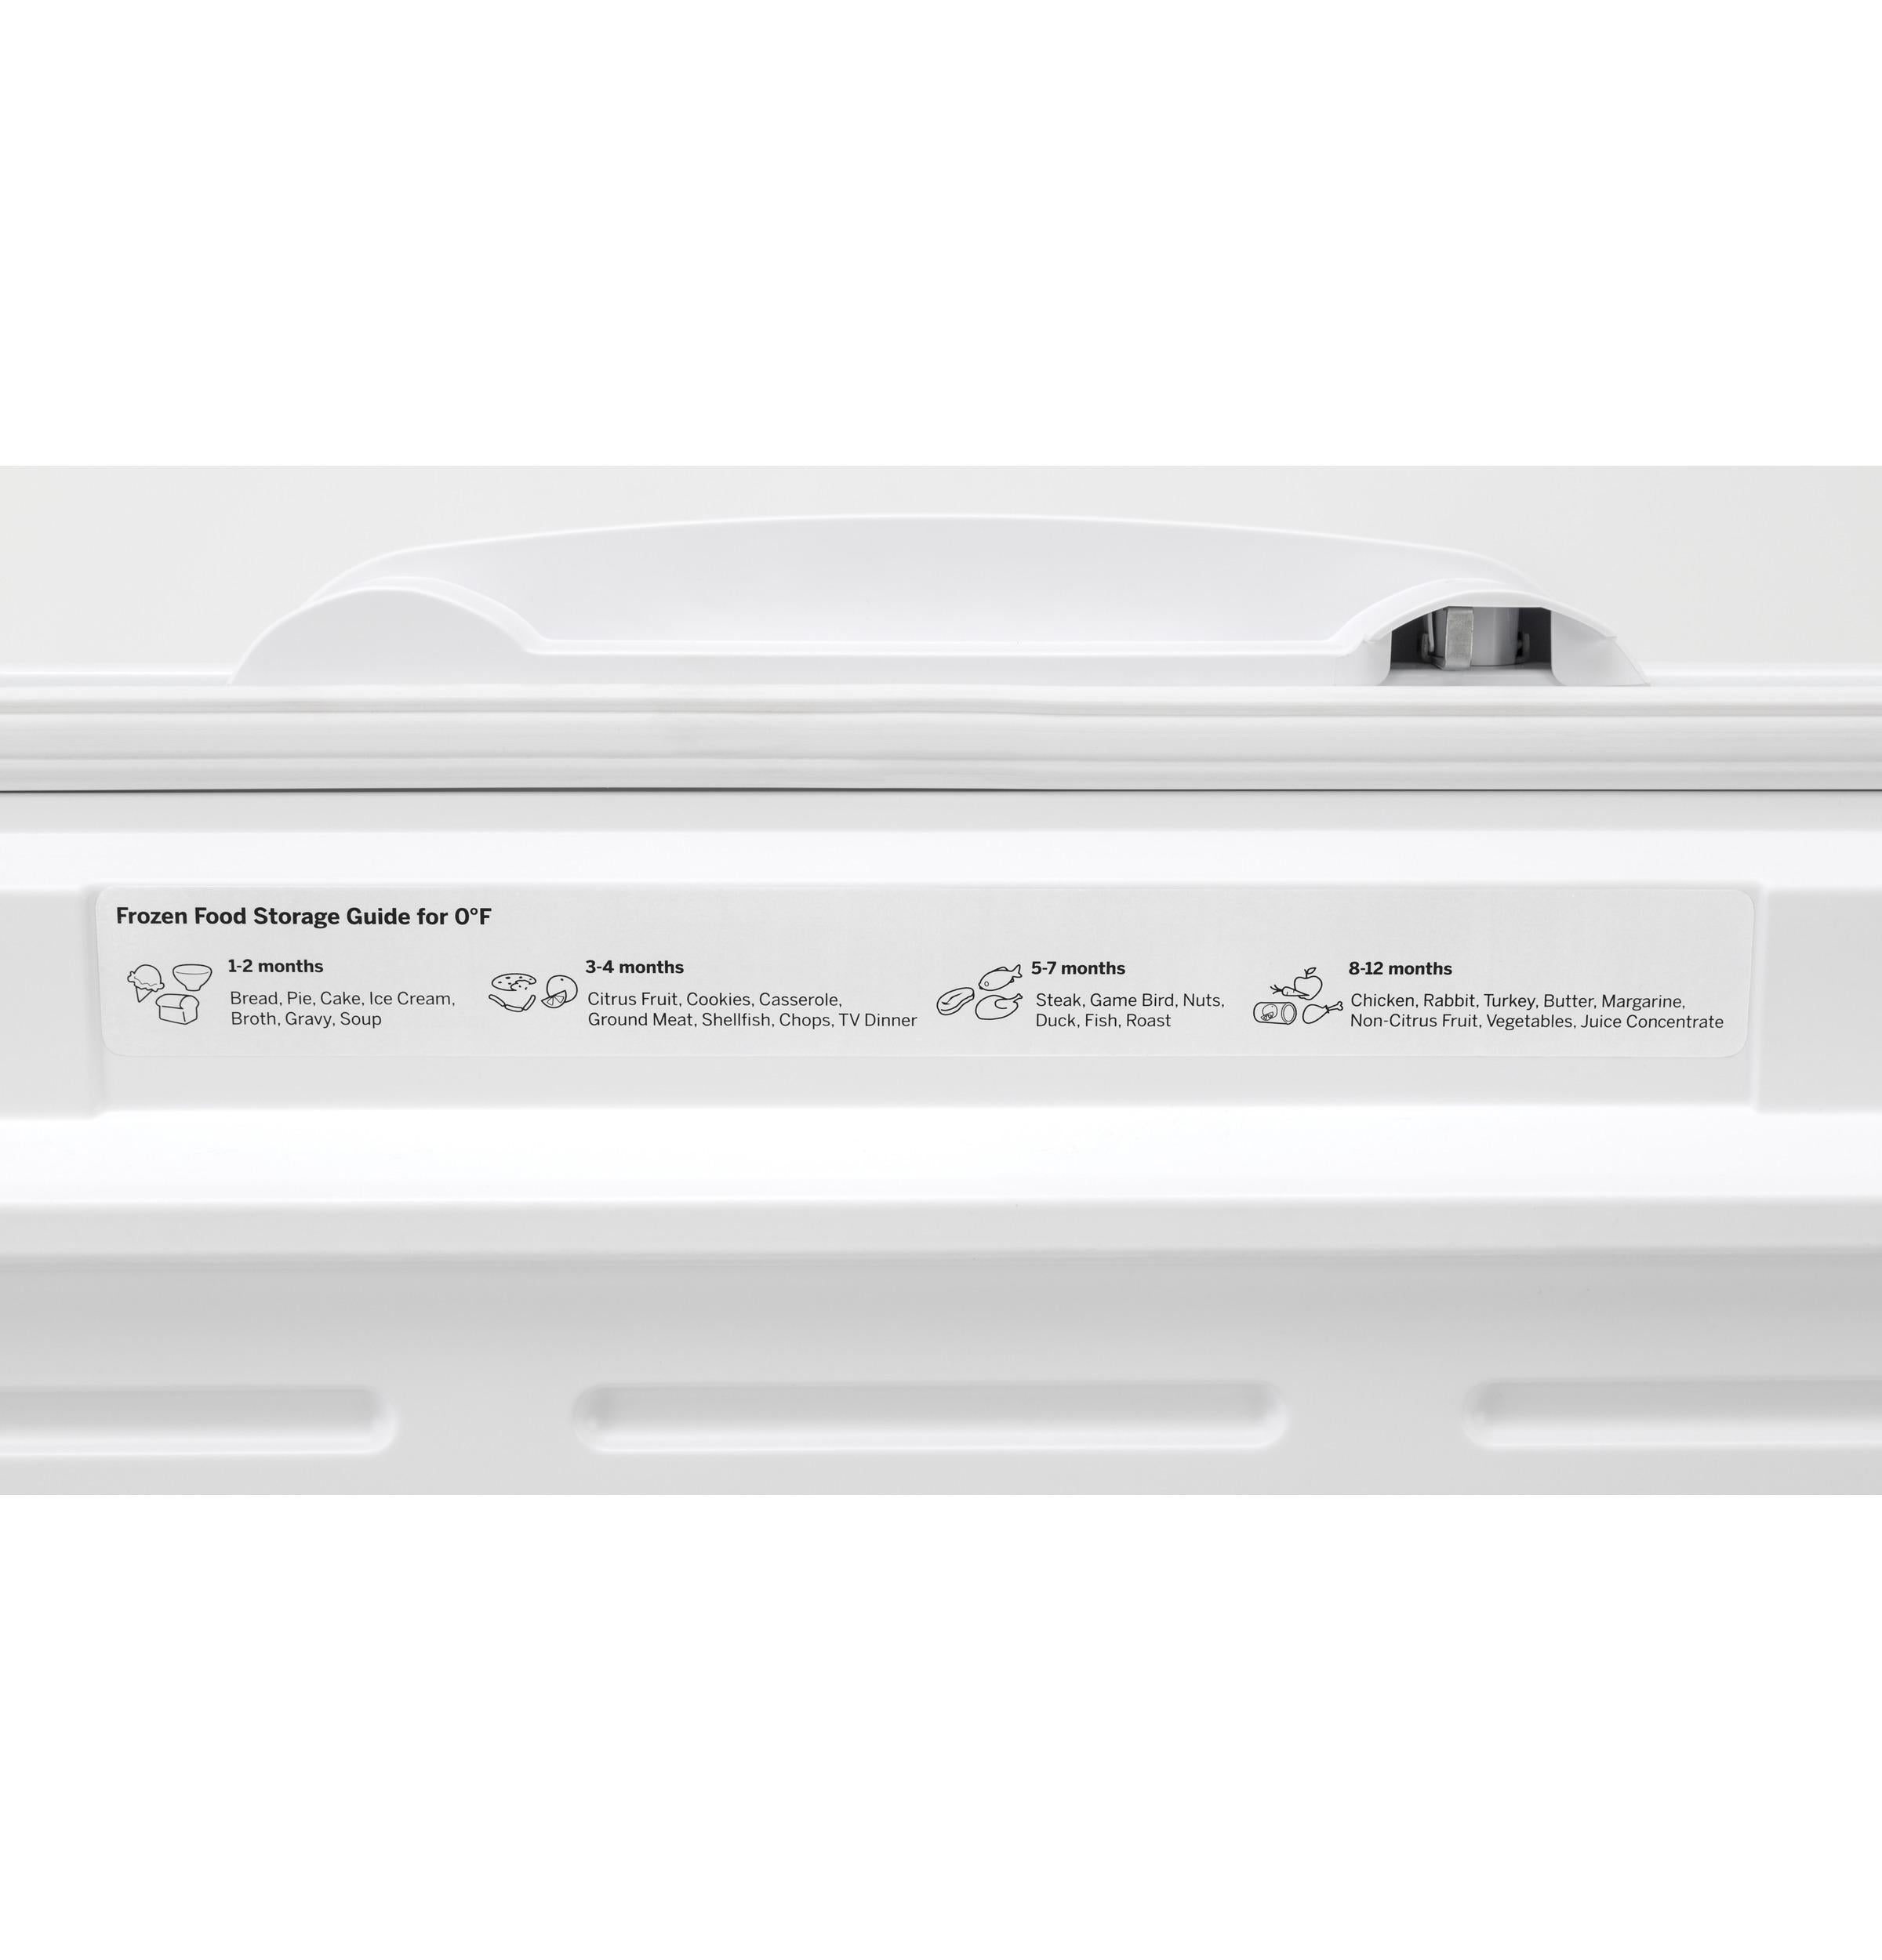 GE® ENERGY STAR® 21.7 Cu. Ft. Manual Defrost Chest Freezer